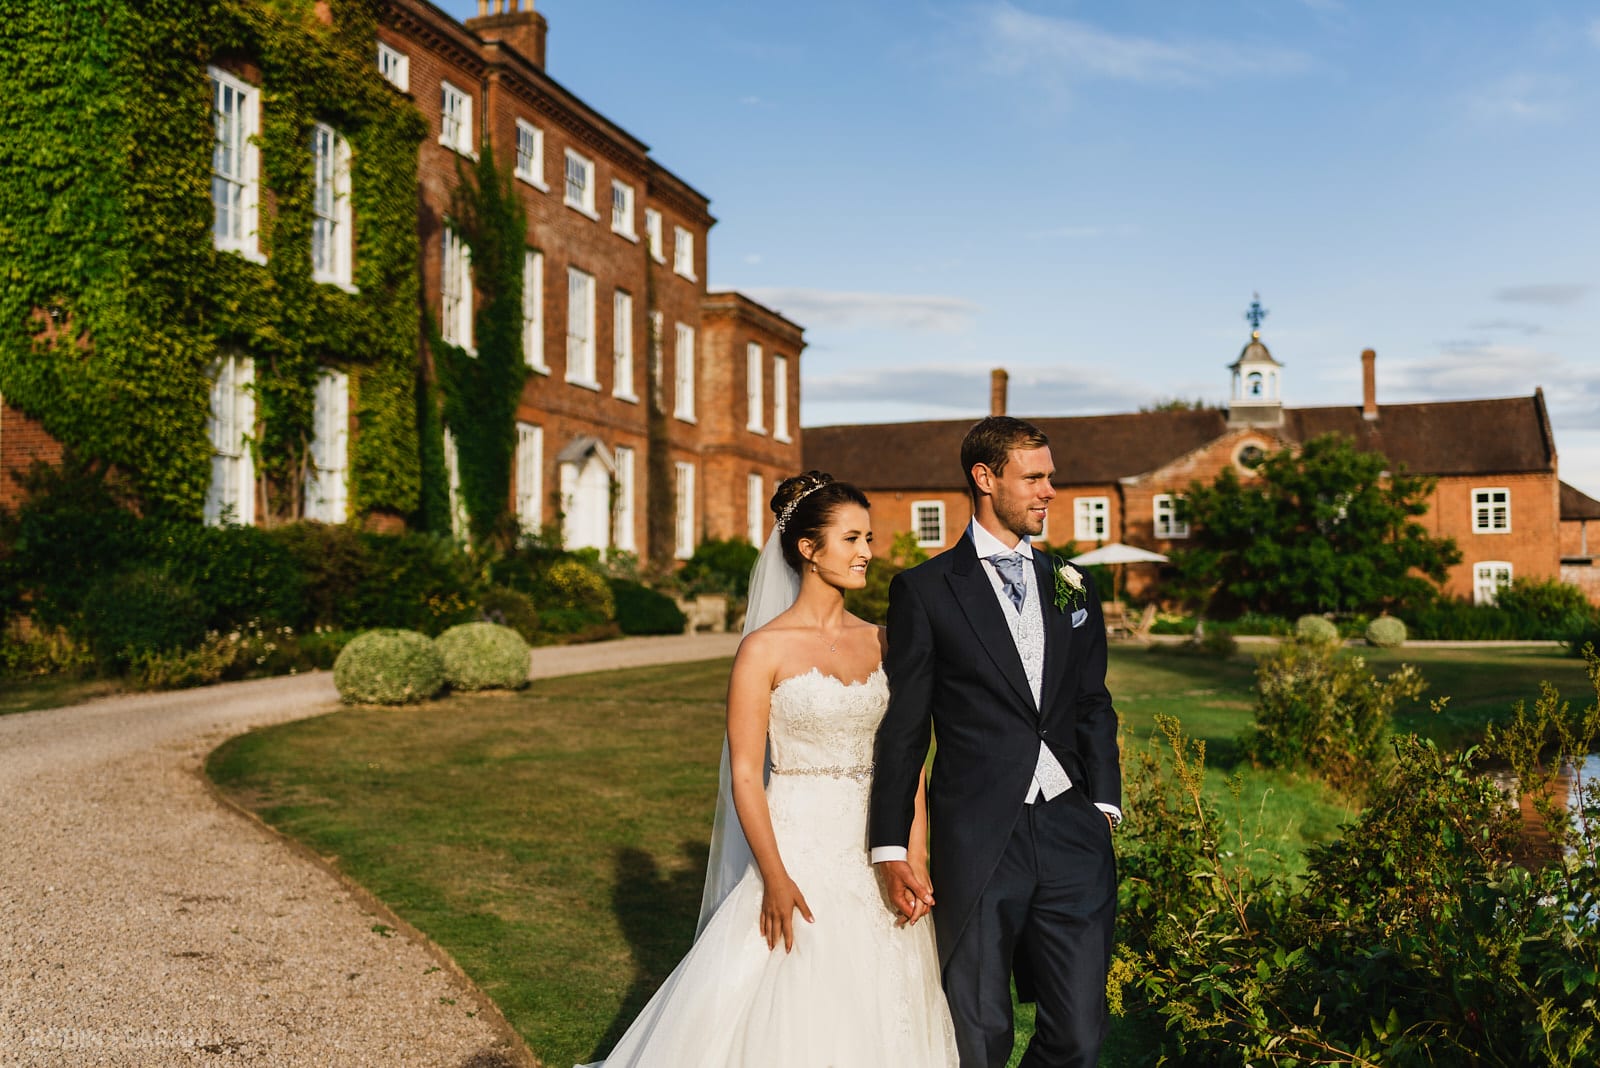 Bride and groom at Delbury Hall in beautiful evening light